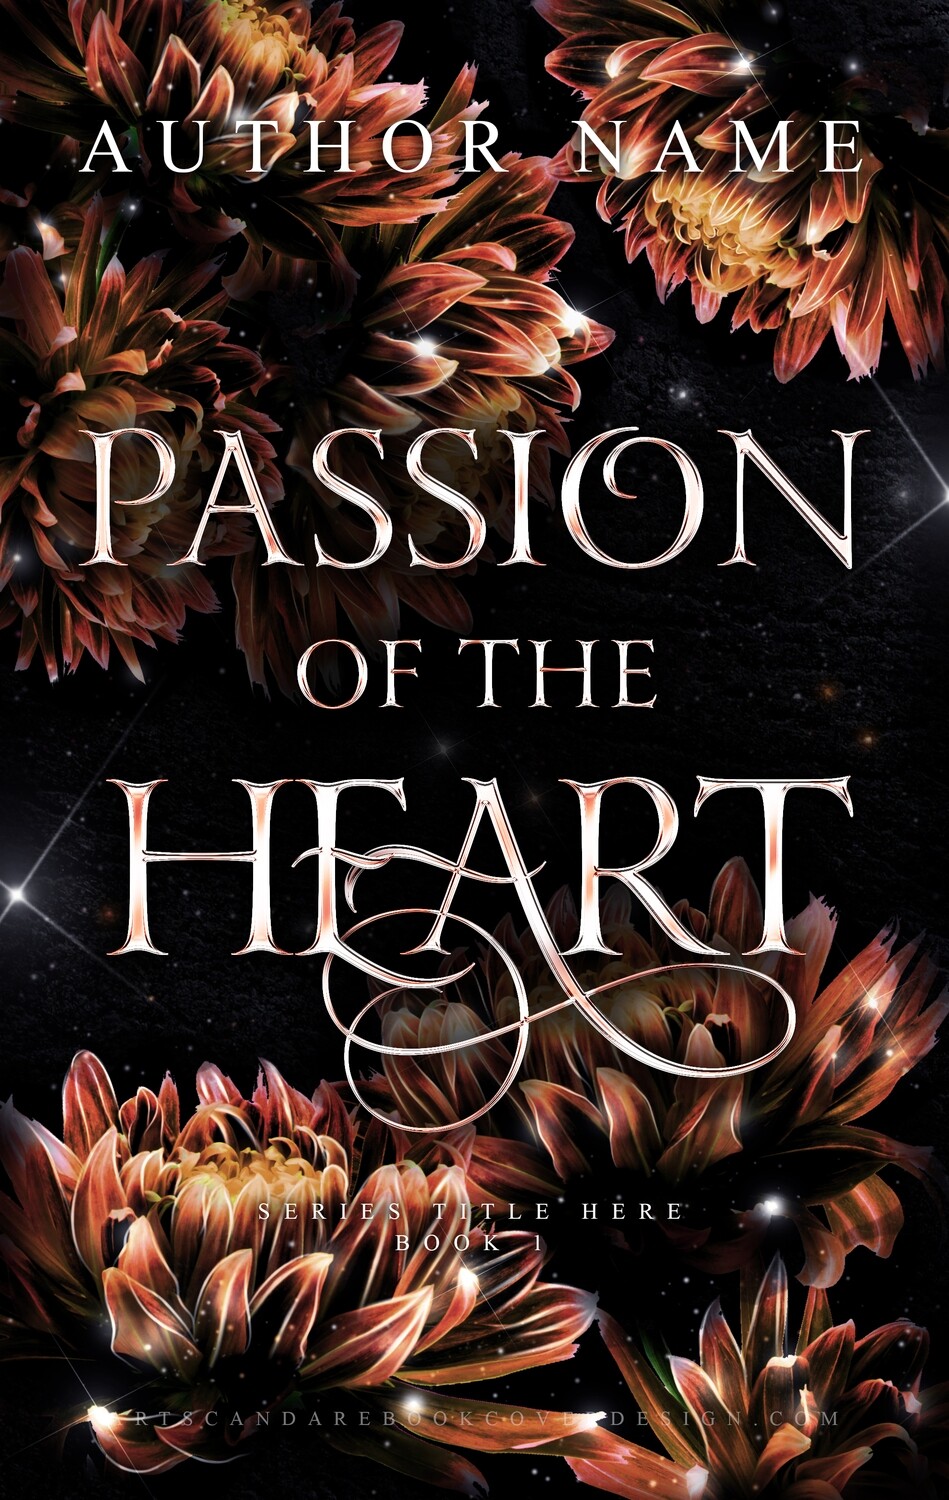 PASSION OF THE HEART